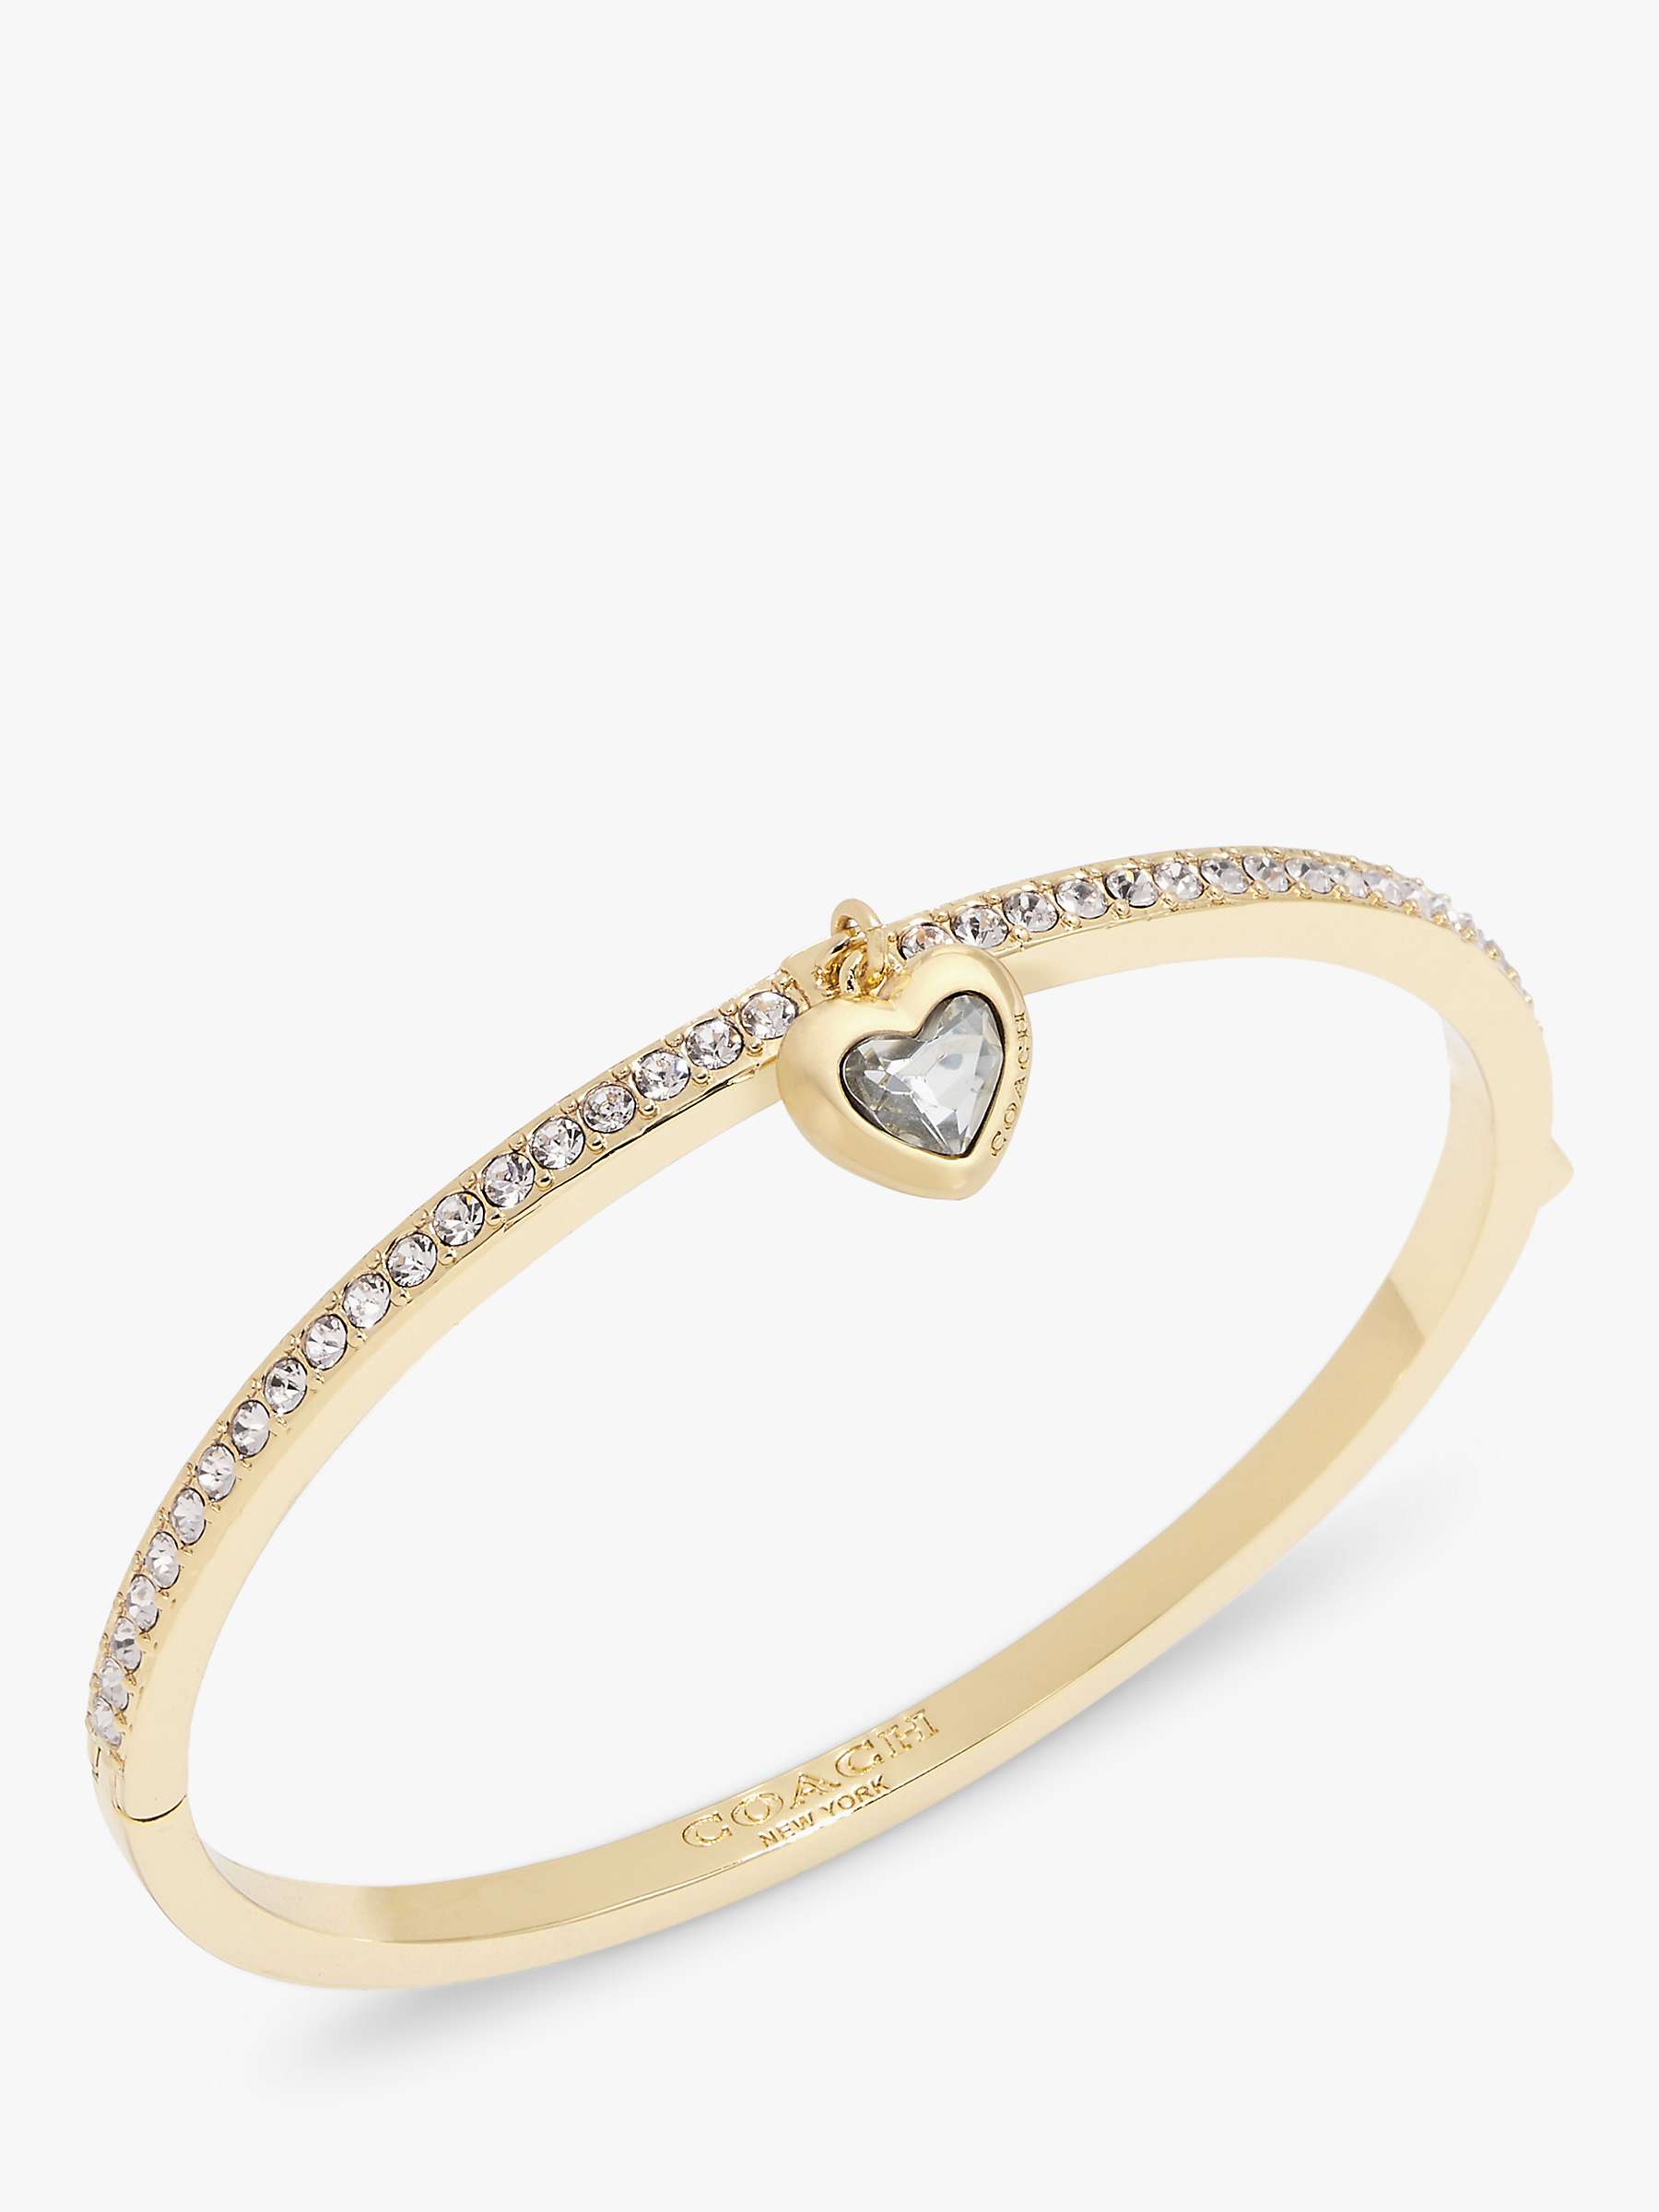 Buy Coach Crystal Heart Charm Bangle, Gold Online at johnlewis.com